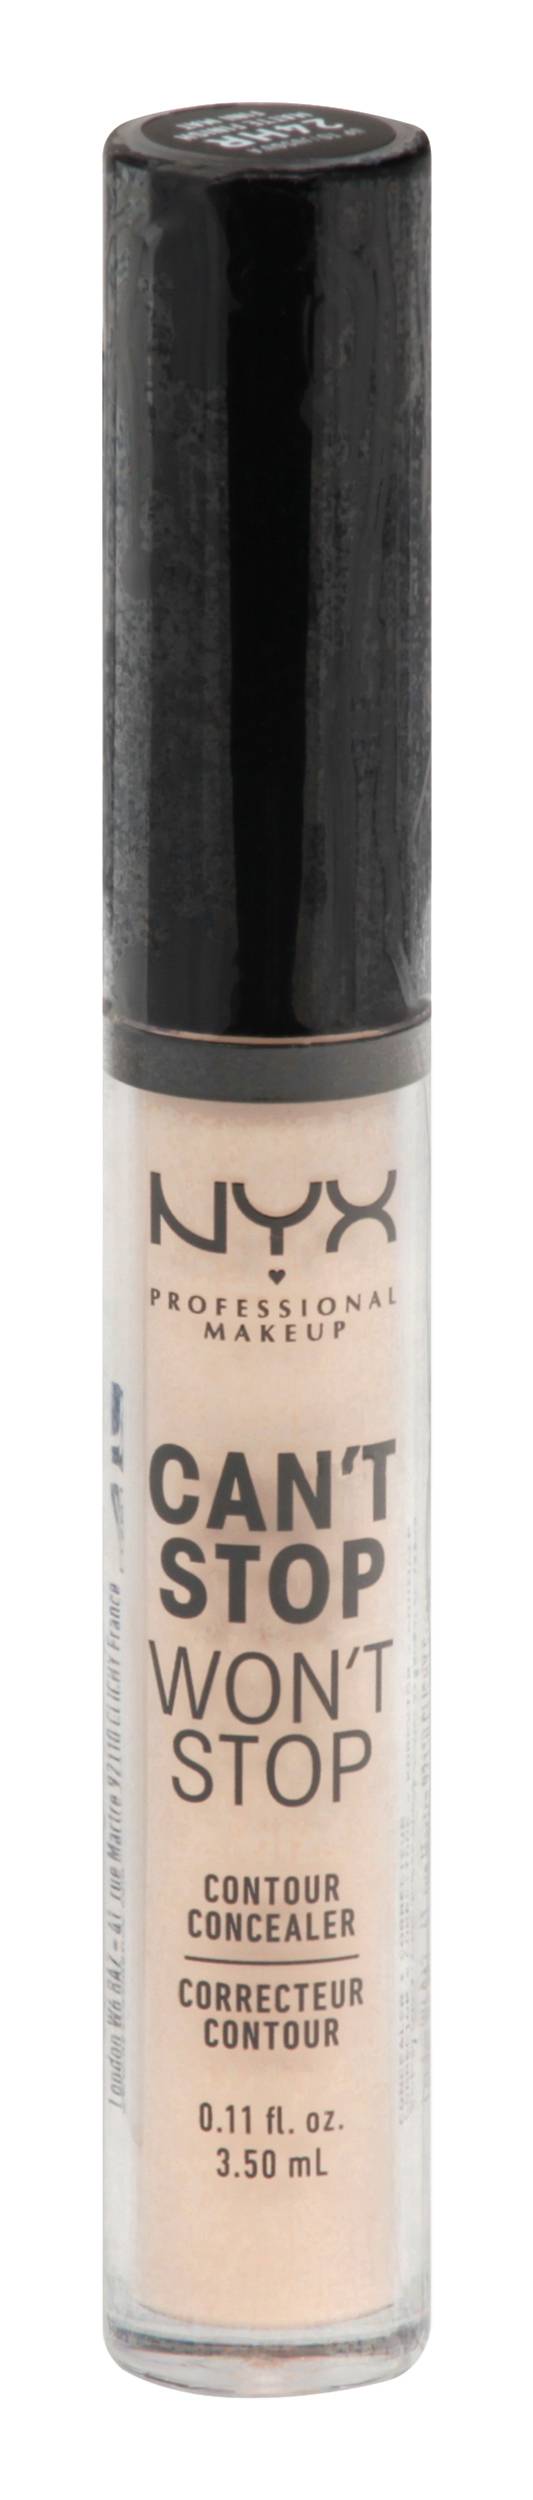 Nyx Can\'t Stop Won\'t | | Contour Postmates Delivery Cswsc06 Concealer You Vanilla Near Stop